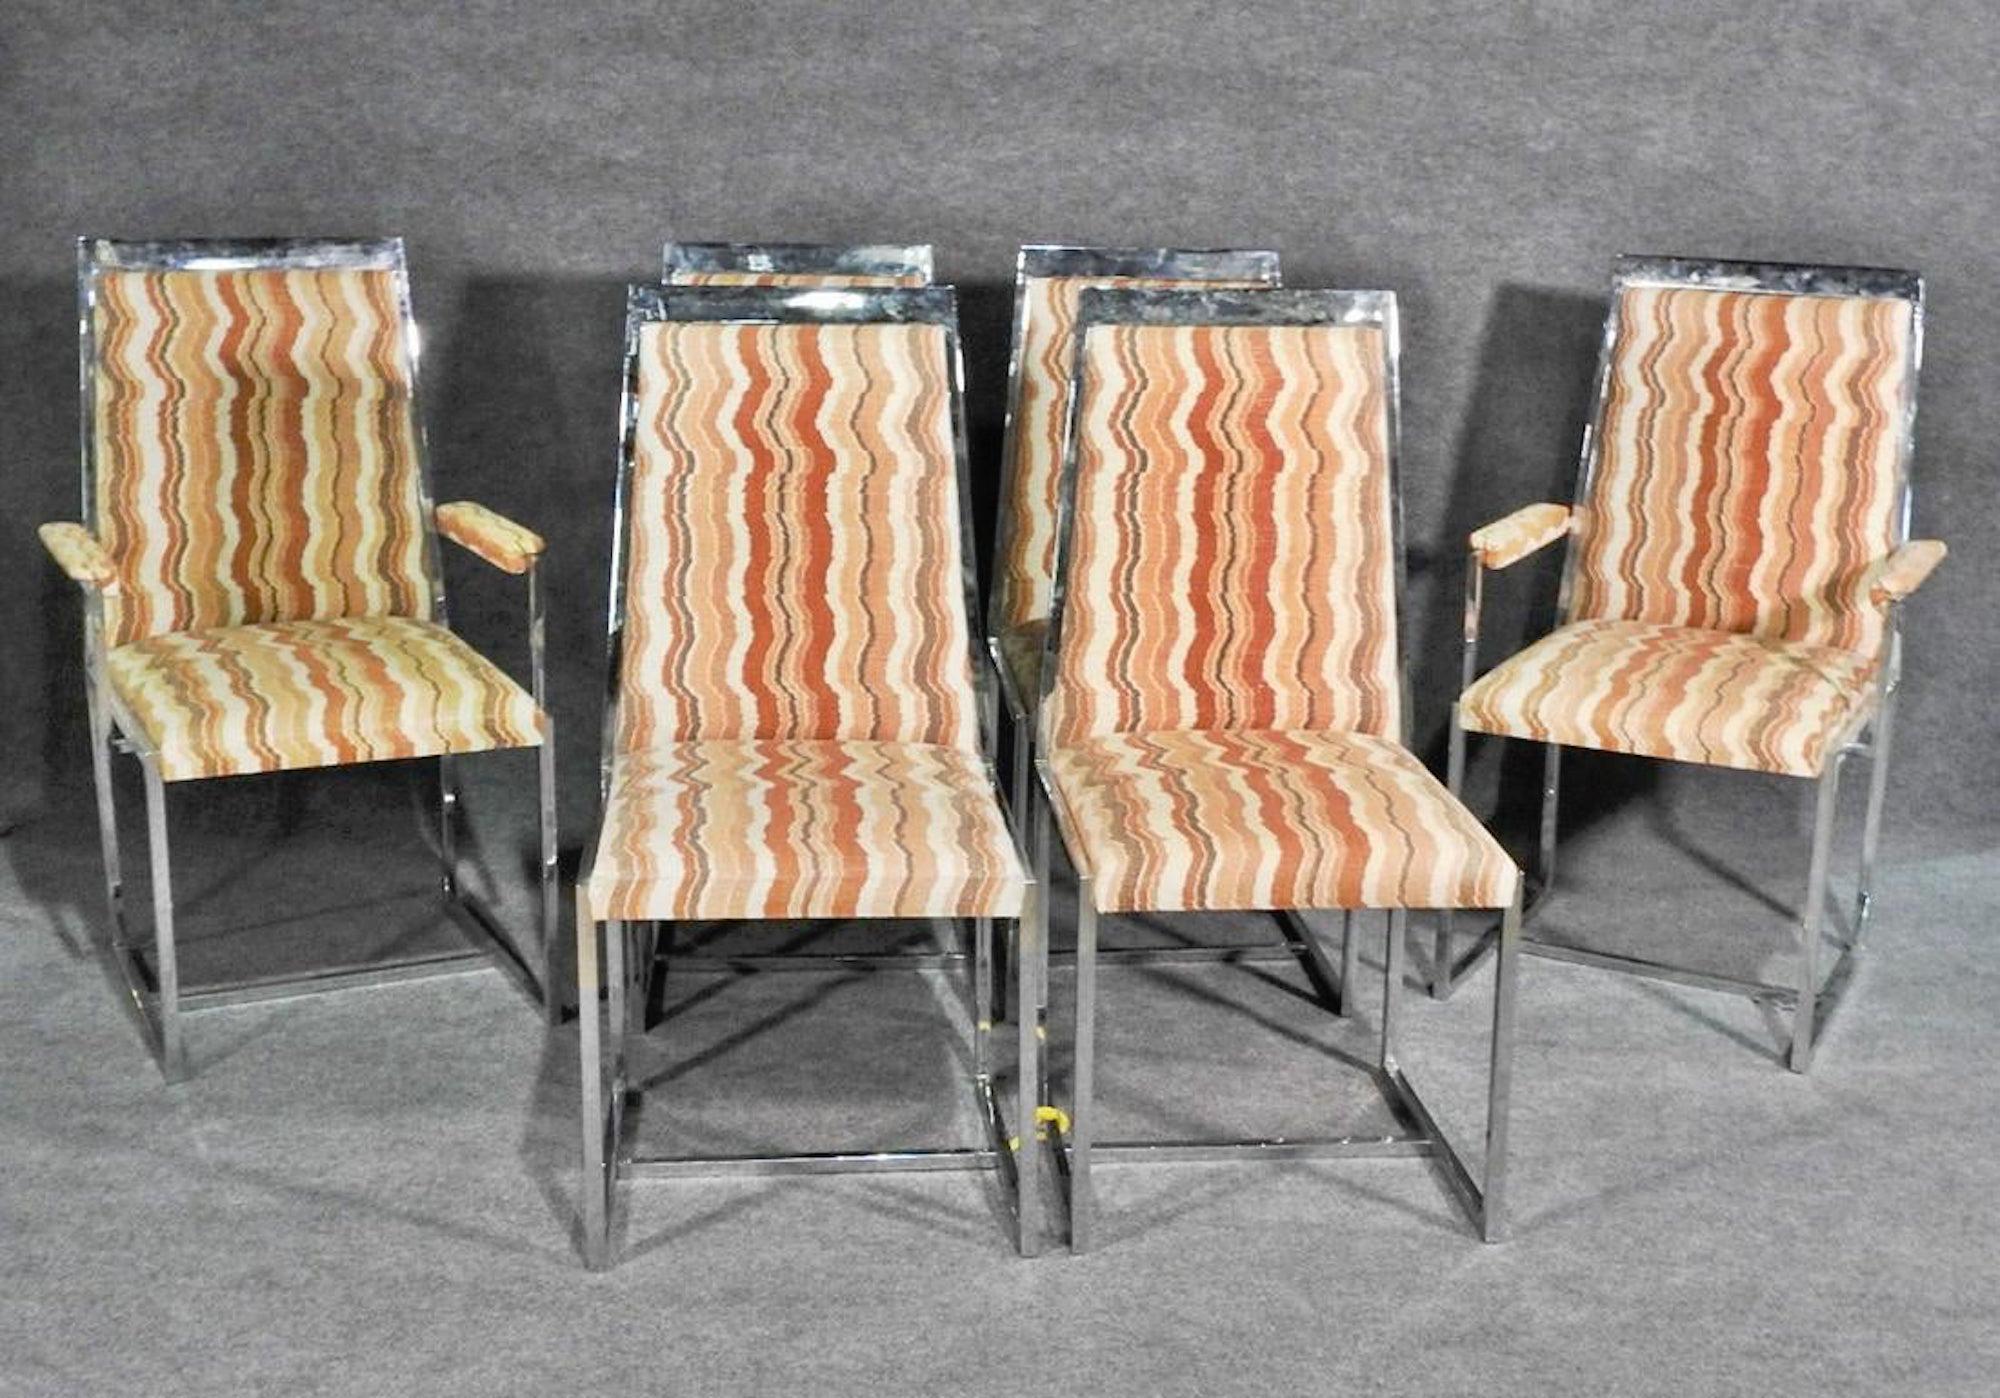 Set of six Milo Baughman style dining chairs with polished chrome frames.
(Please confirm item location - NY or NJ - with dealer).
 